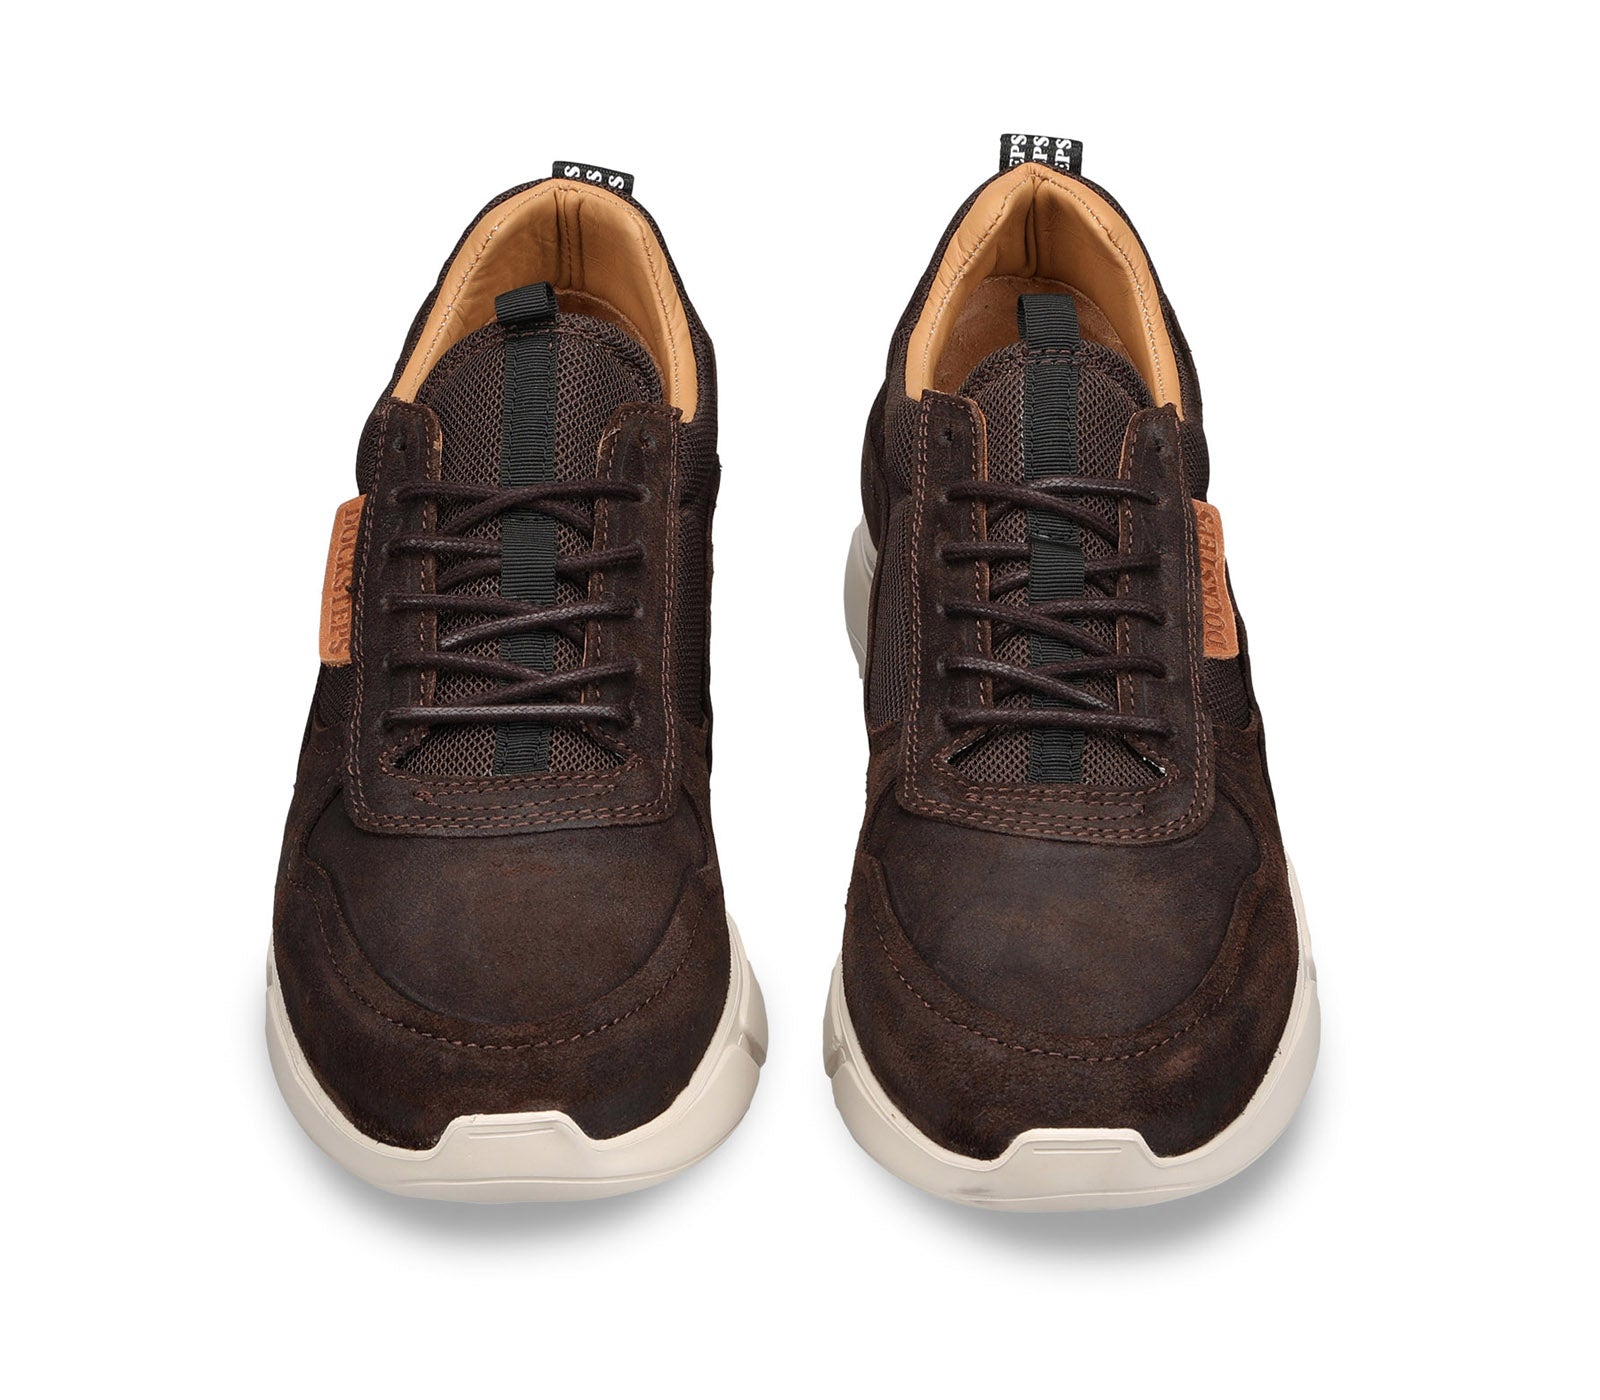 Men's Sneakers in Mixed Suede and Technical Fabric with White Rubber Sole